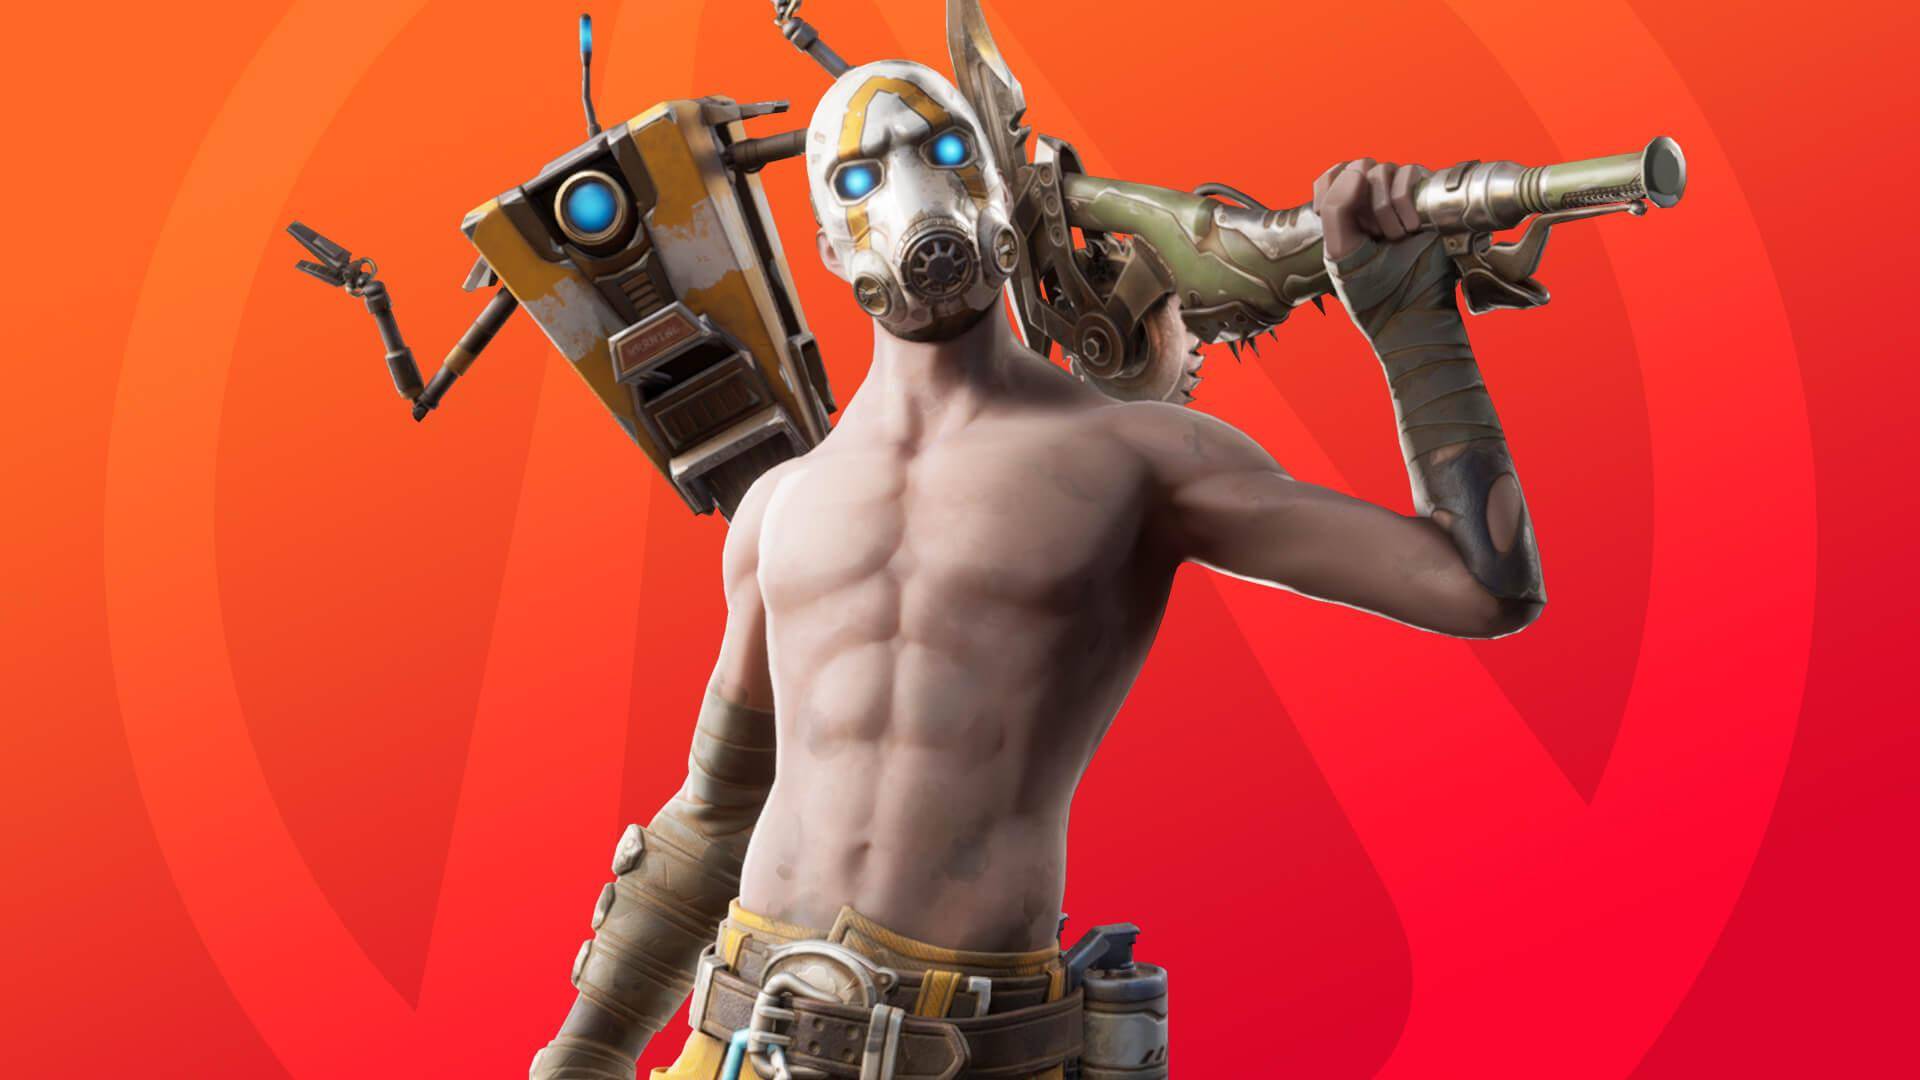 Fortnite launches a Borderlands crossover event